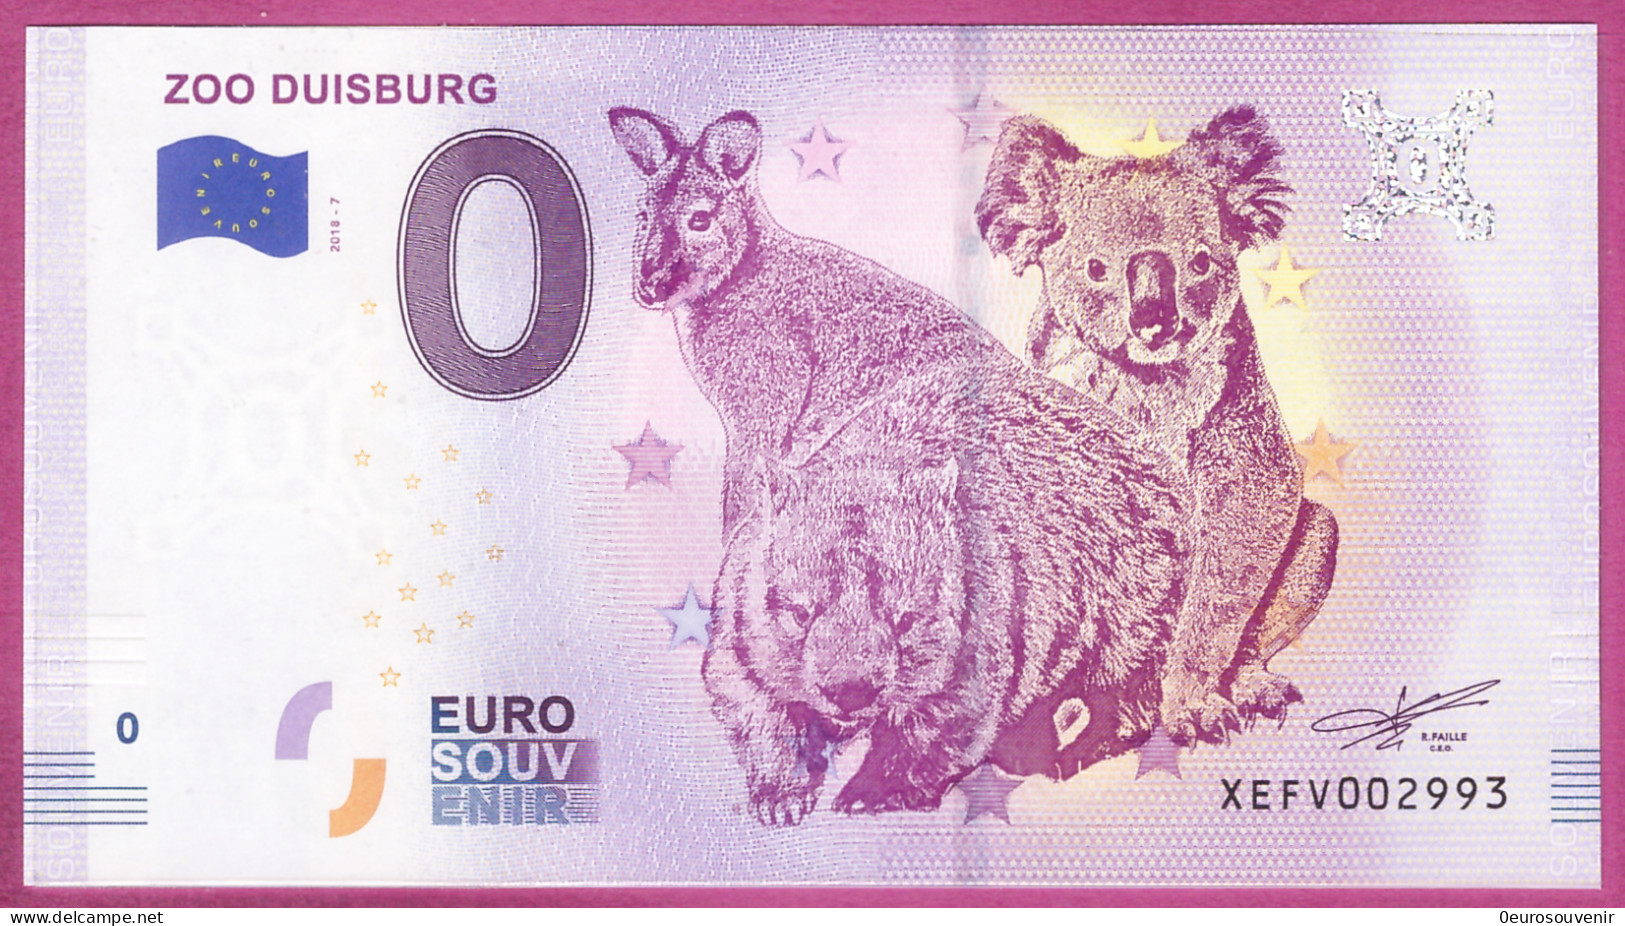 0-Euro XEFV 2018-7 ZOO DUISBURG - Private Proofs / Unofficial